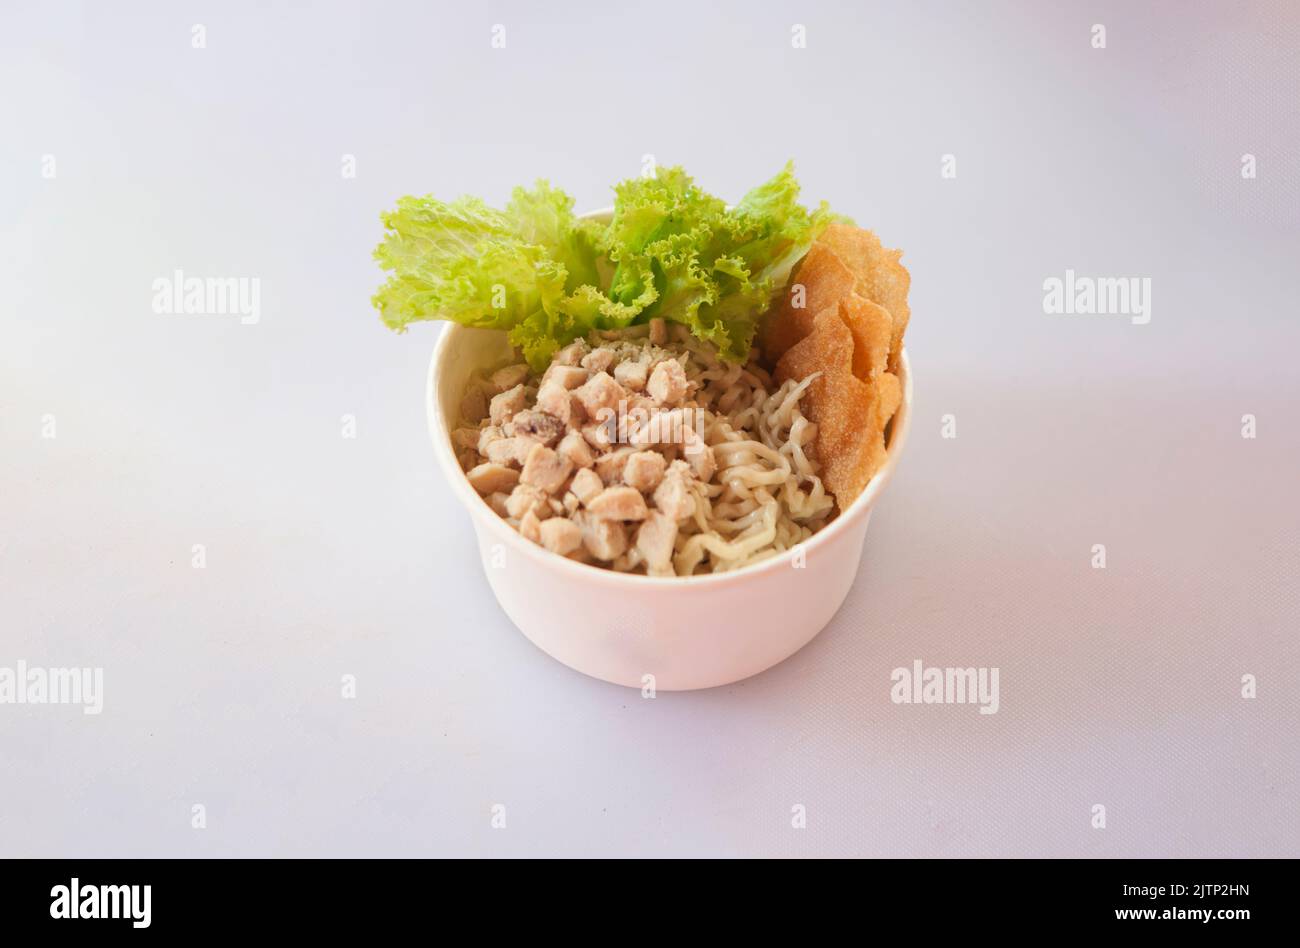 Mie Ayam or  chicken noodle on white background. Yellow wheat noodles with chicken meat topping, Served with fried dumplings, Stock Photo